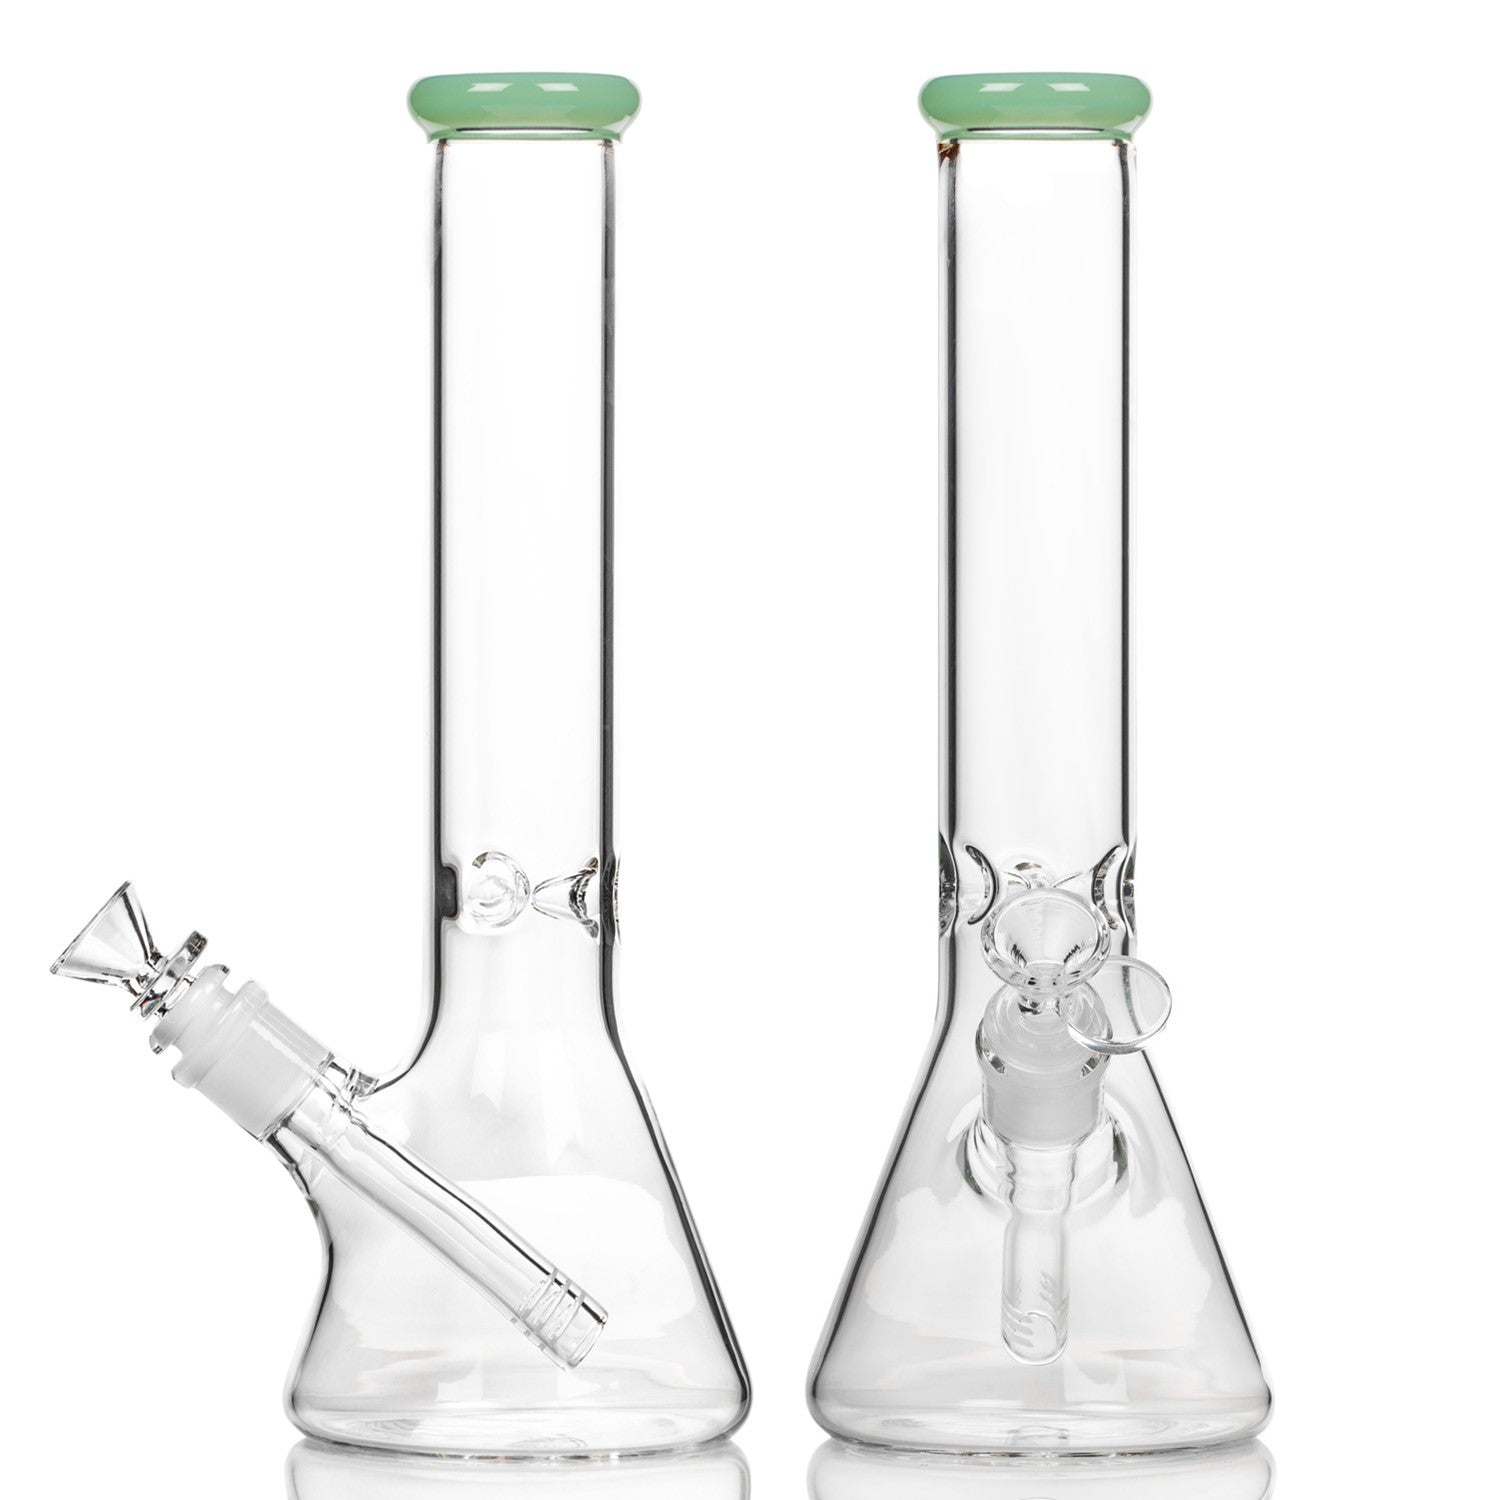 Cute small sized glass bongs with a beaker base for Aussie stoners.